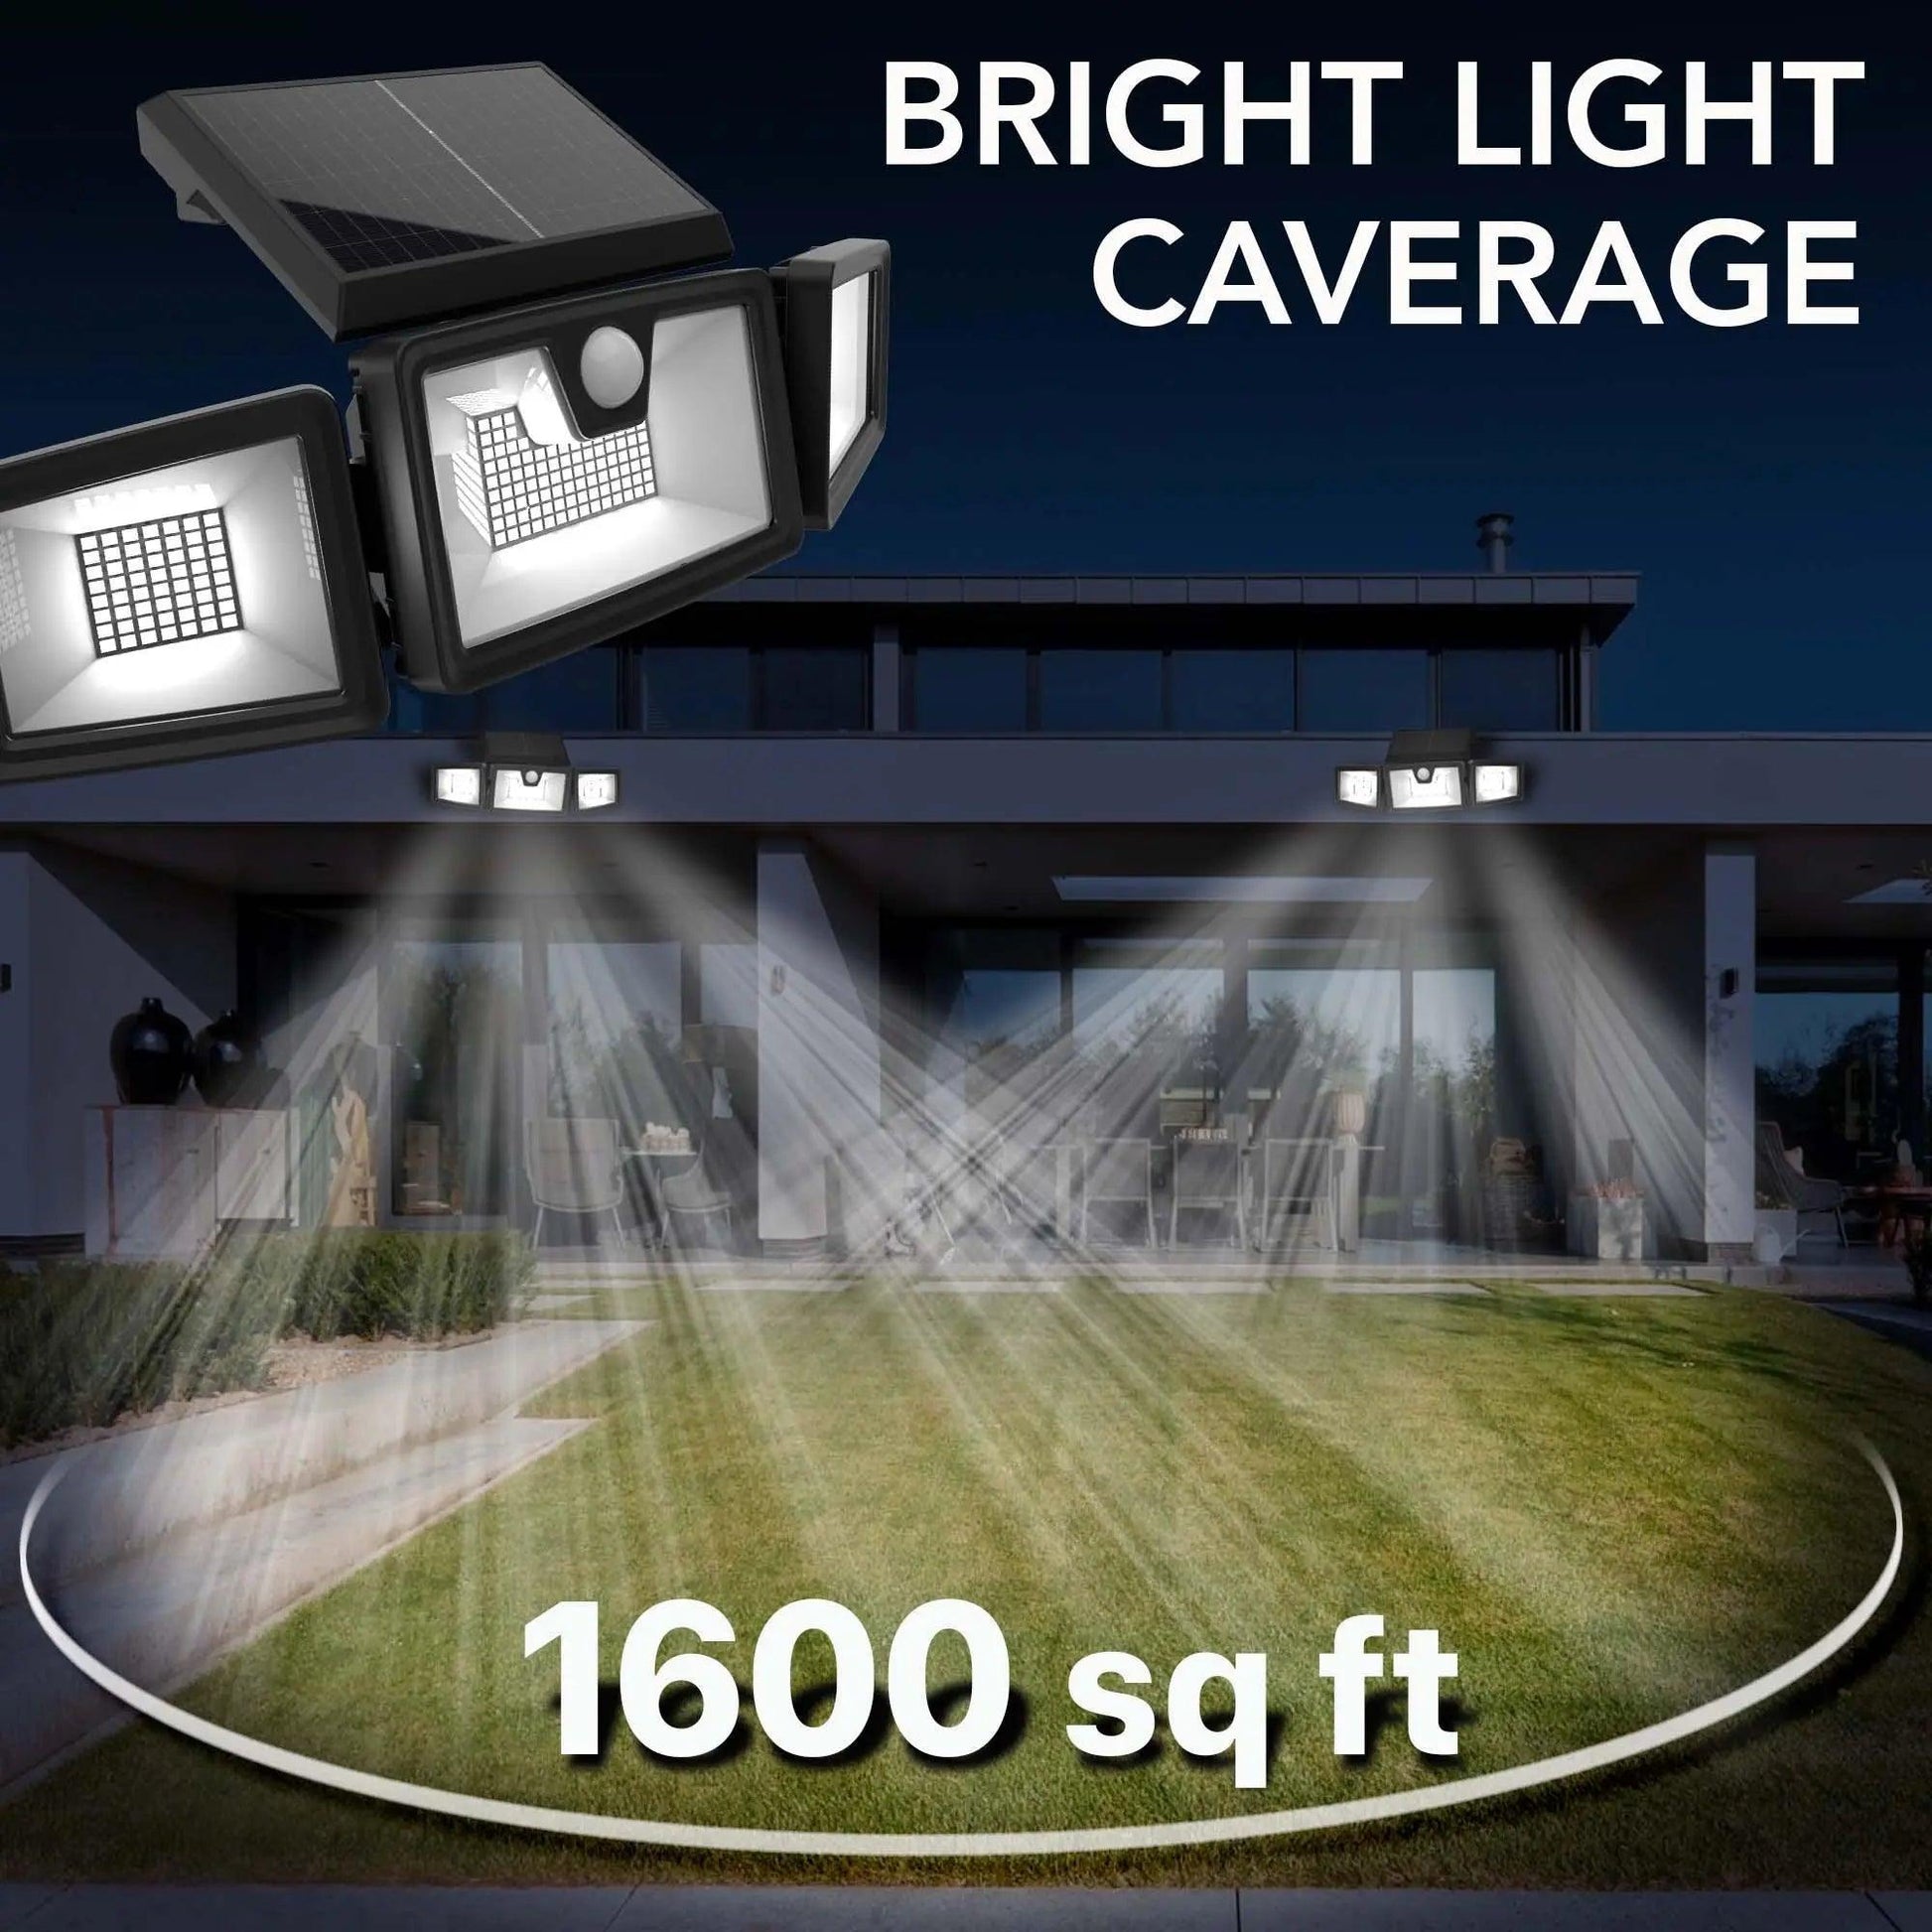 Outdoor Security Solar Lights: 216 LEDs, Adjustable 360°, 3 Heads, Waterproof IP65 - Lazy Pro